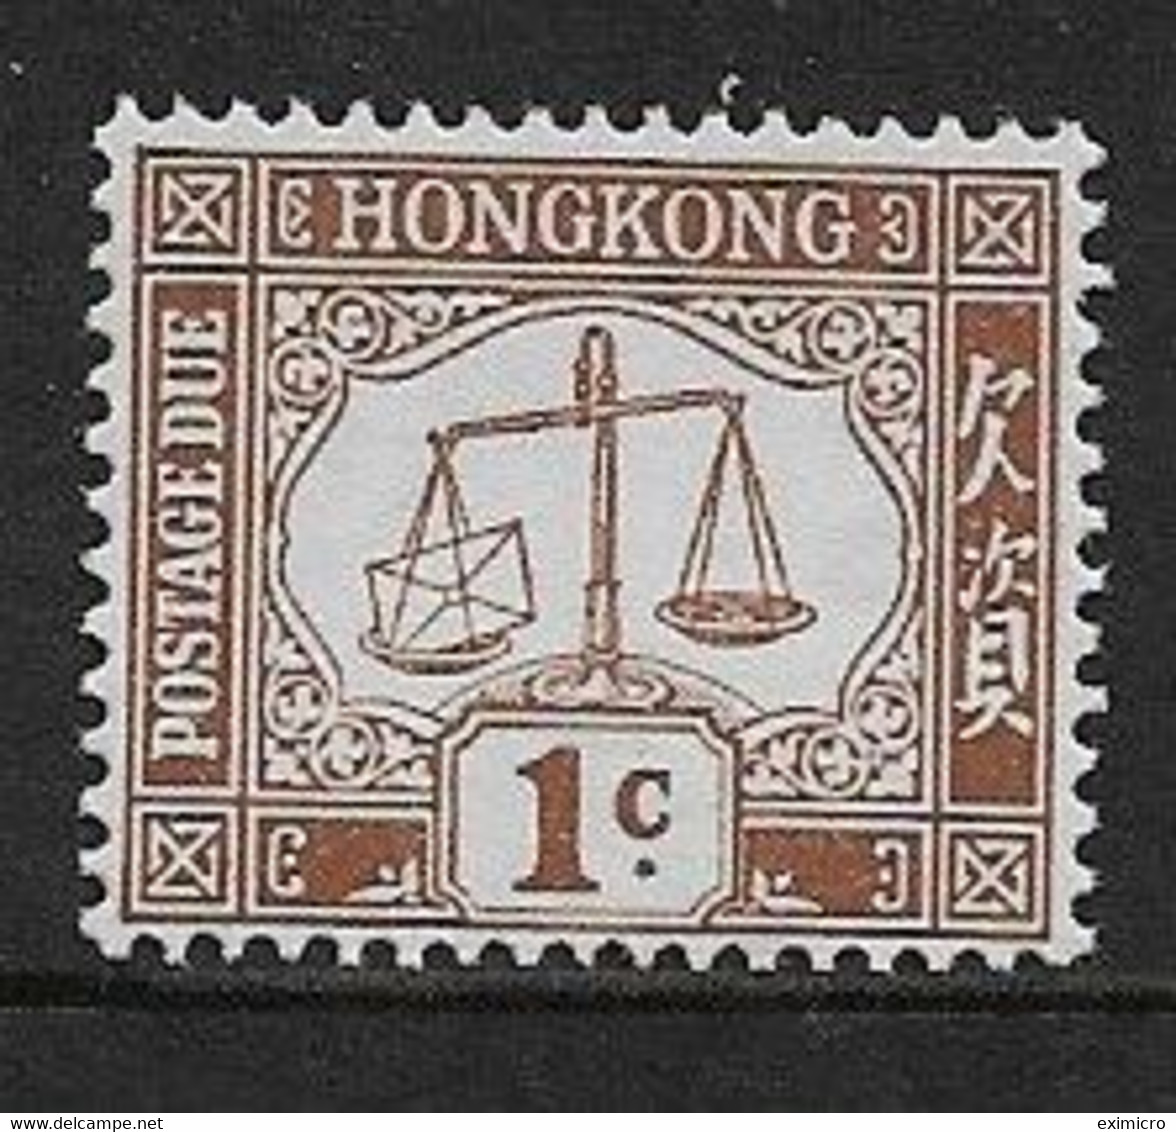 HONG KONG 1923 1c POSTAGE DUE SG D1a LIGHTLY MOUNTED MINT - Impuestos